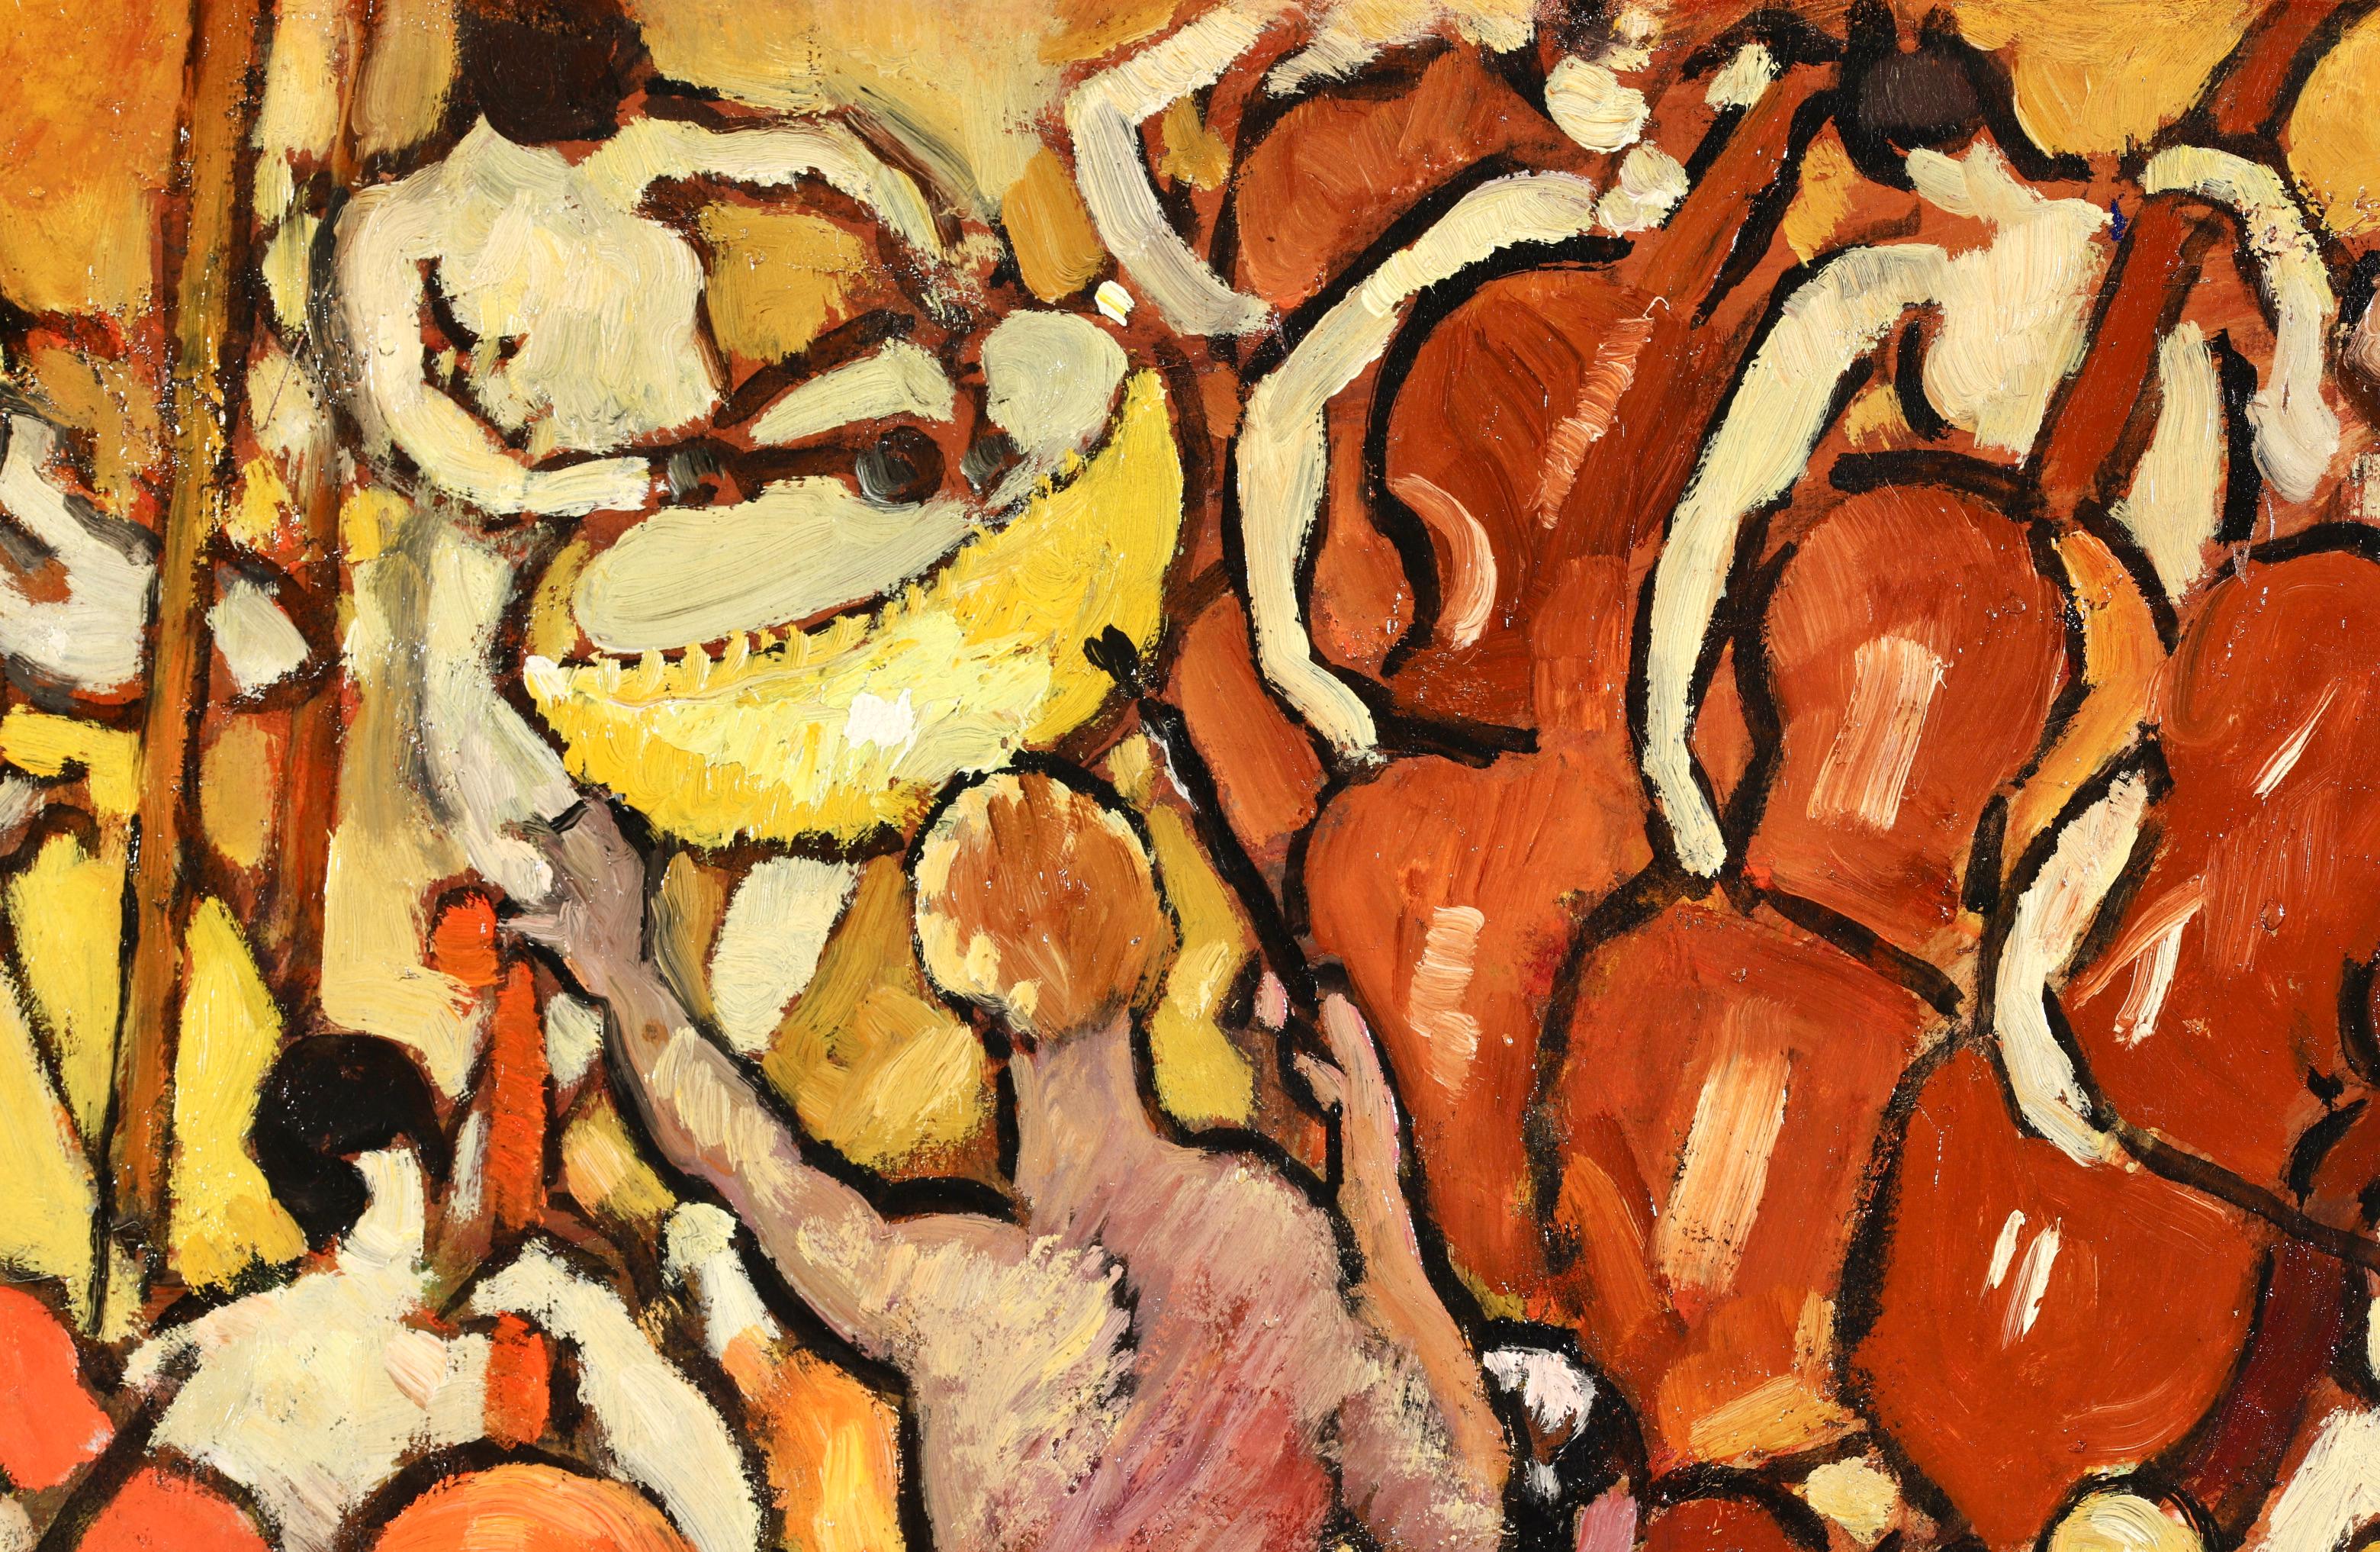 Signed fauvist figurative oil on panel by French painter Louis Valtat. This stunning piece depicts a nude orchestra with the conductor in the foreground. The musicians are playing cellos, violins and drums and a harpist is seated on the back left of